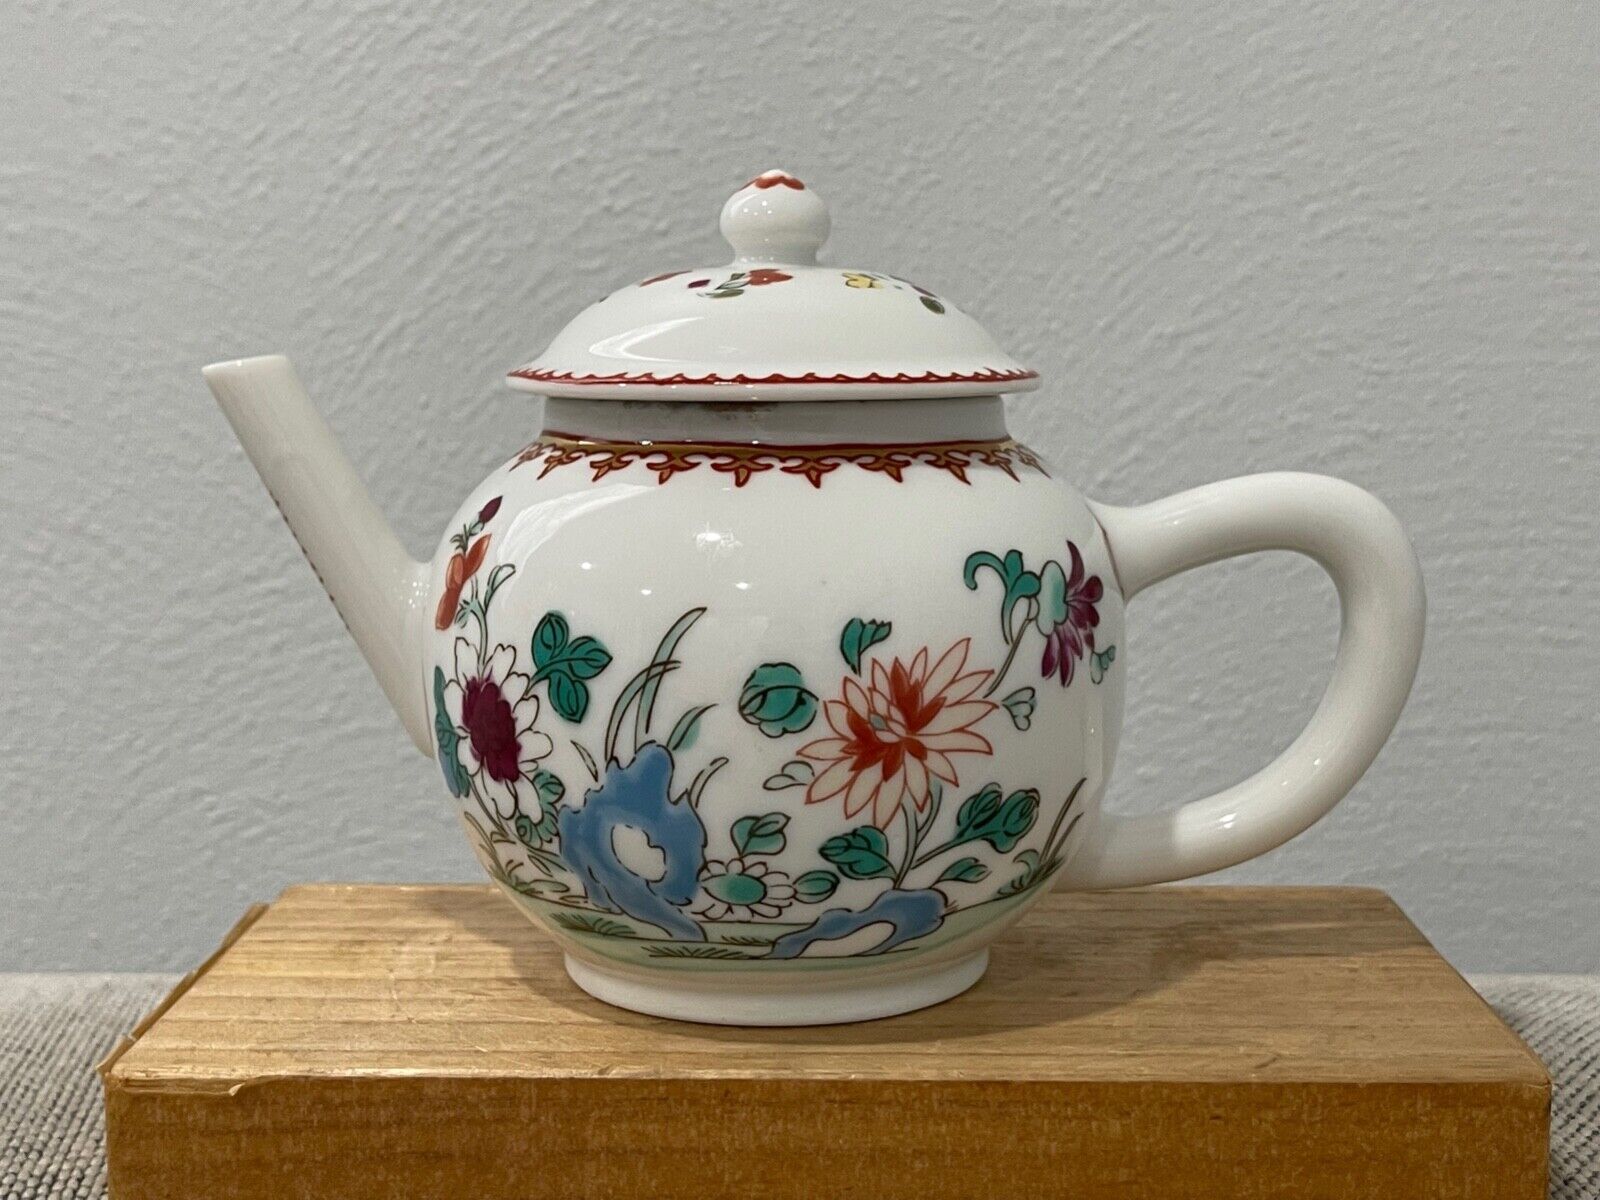 1985 Franklin Mint Victoria and Albert Museum Porcelain Chinese Miniature Teapot